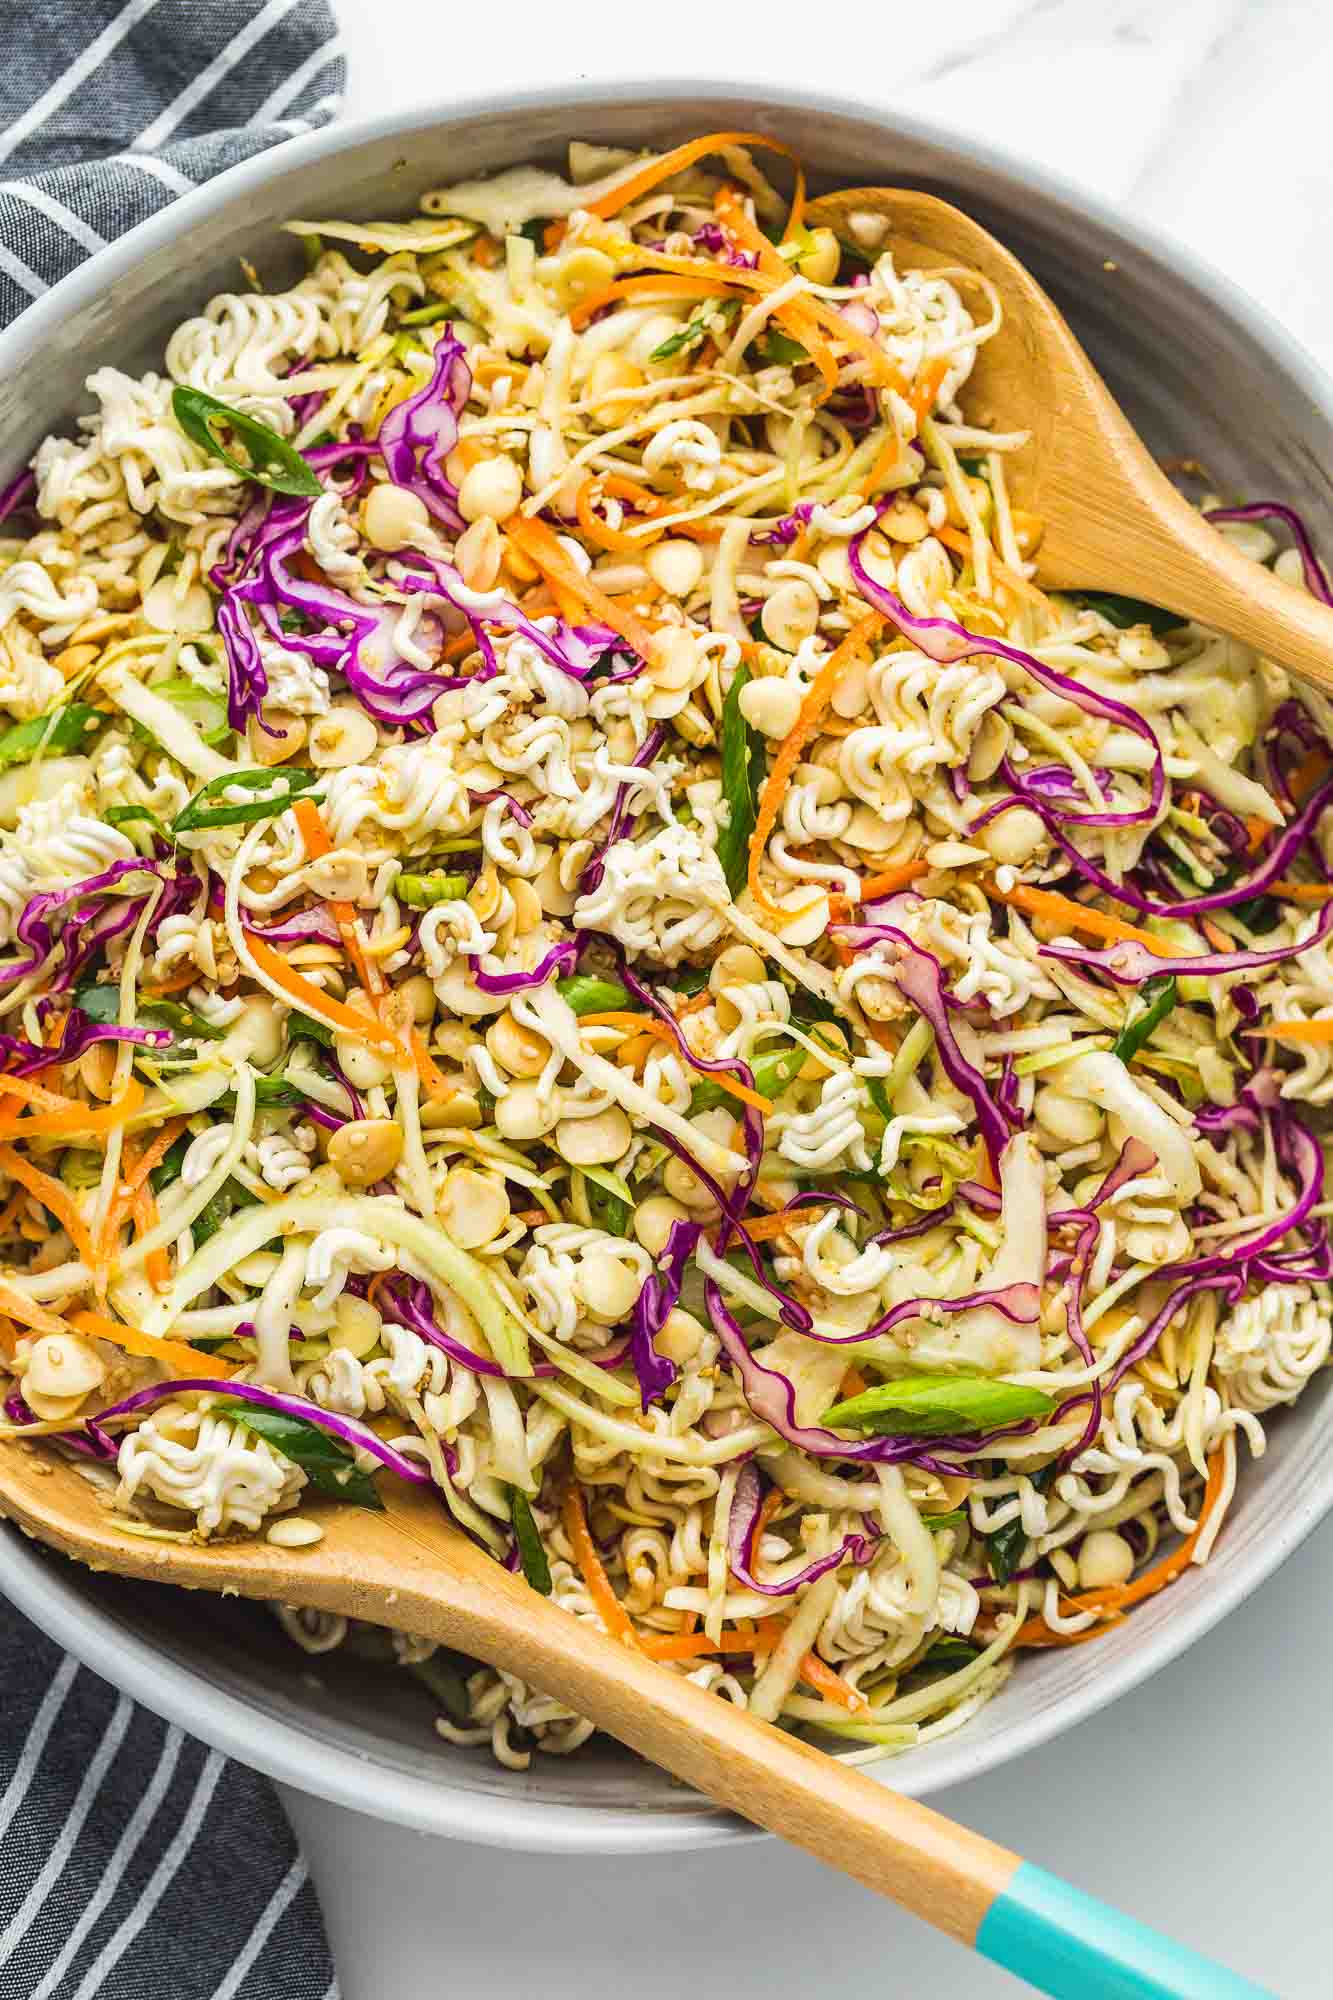 Ramen Noodle Salad in a large gray bowl with wooden serving spoons